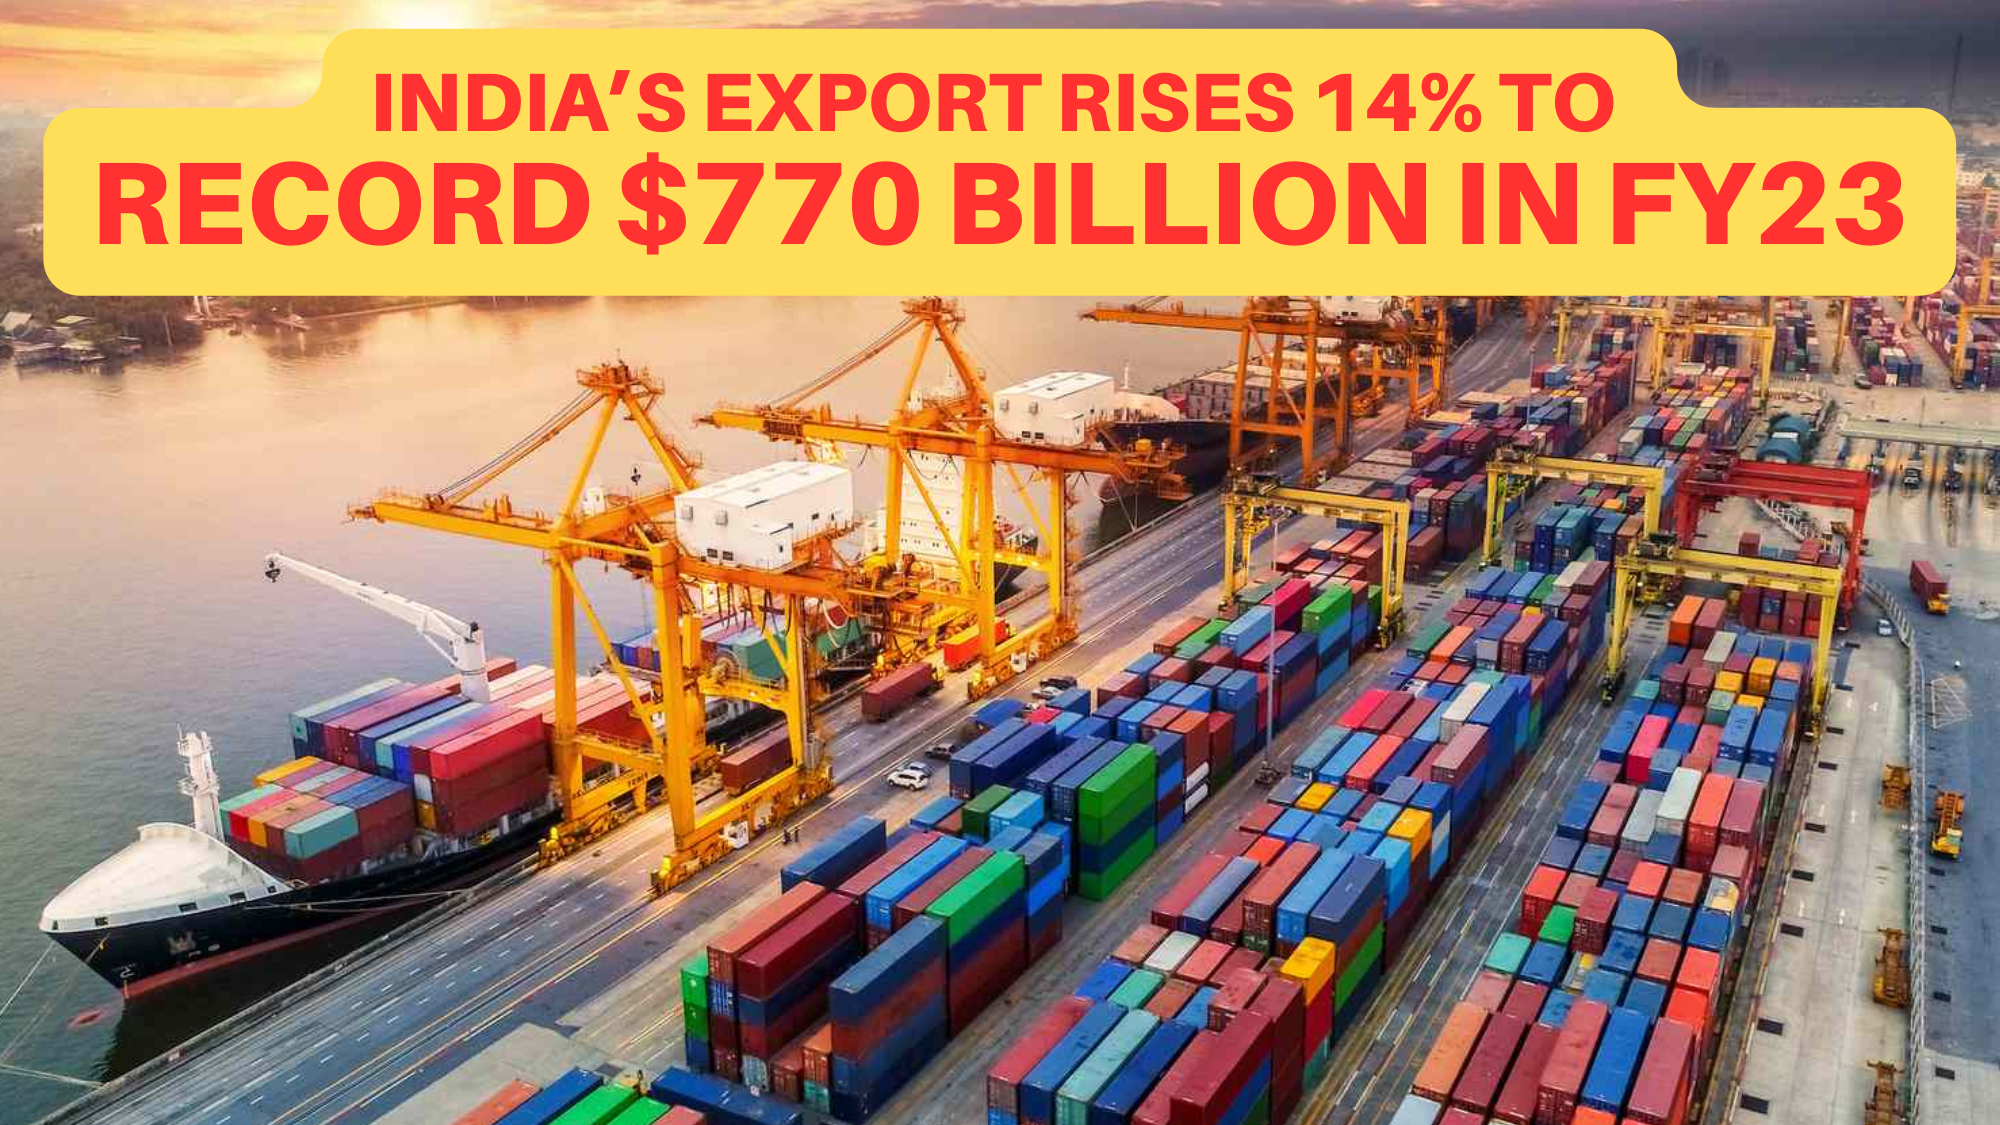 India’s export rises 14% to record $770 billion in FY23